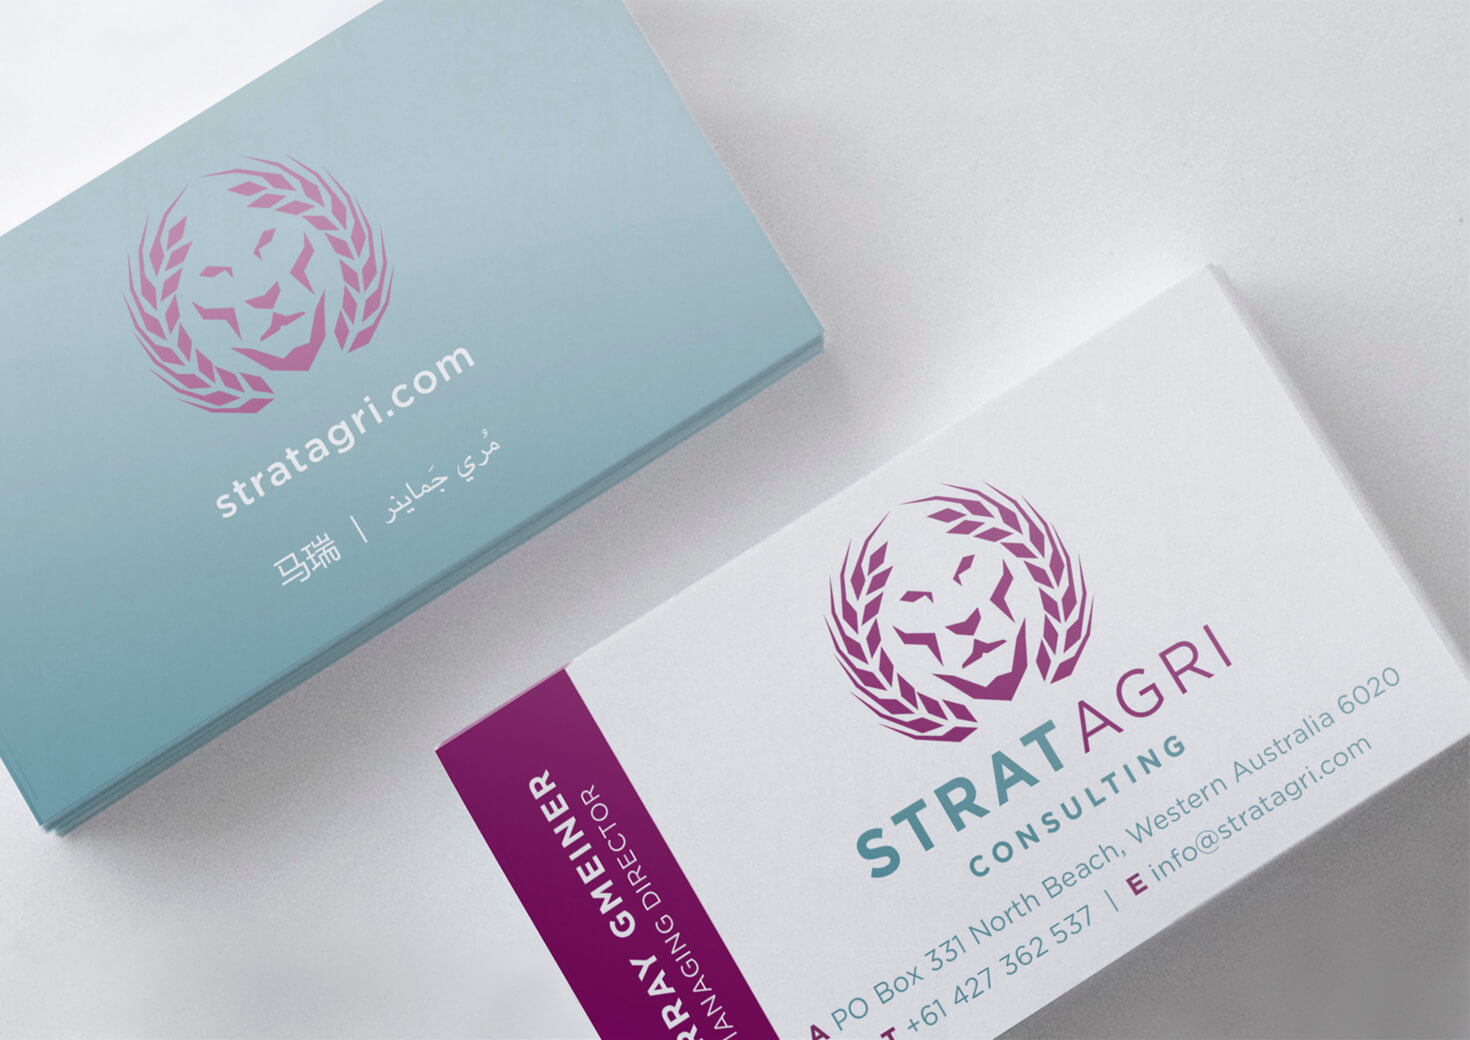 Strat Agri Consulting business cards